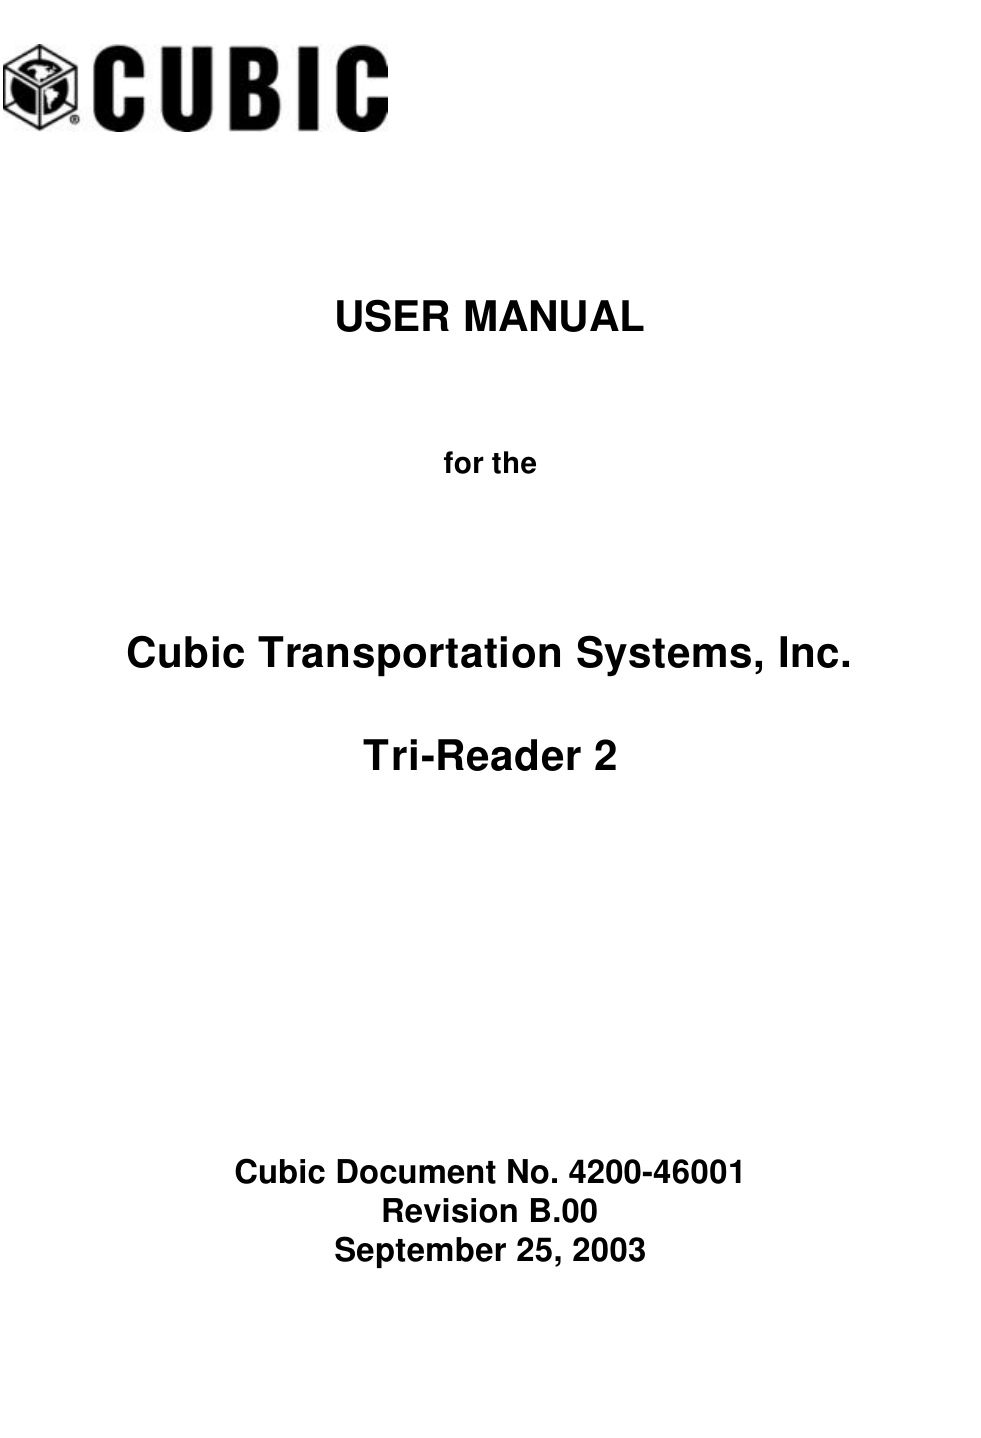            USER MANUAL  for the   Cubic Transportation Systems, Inc.  Tri-Reader 2              Cubic Document No. 4200-46001 Revision B.00 September 25, 2003 